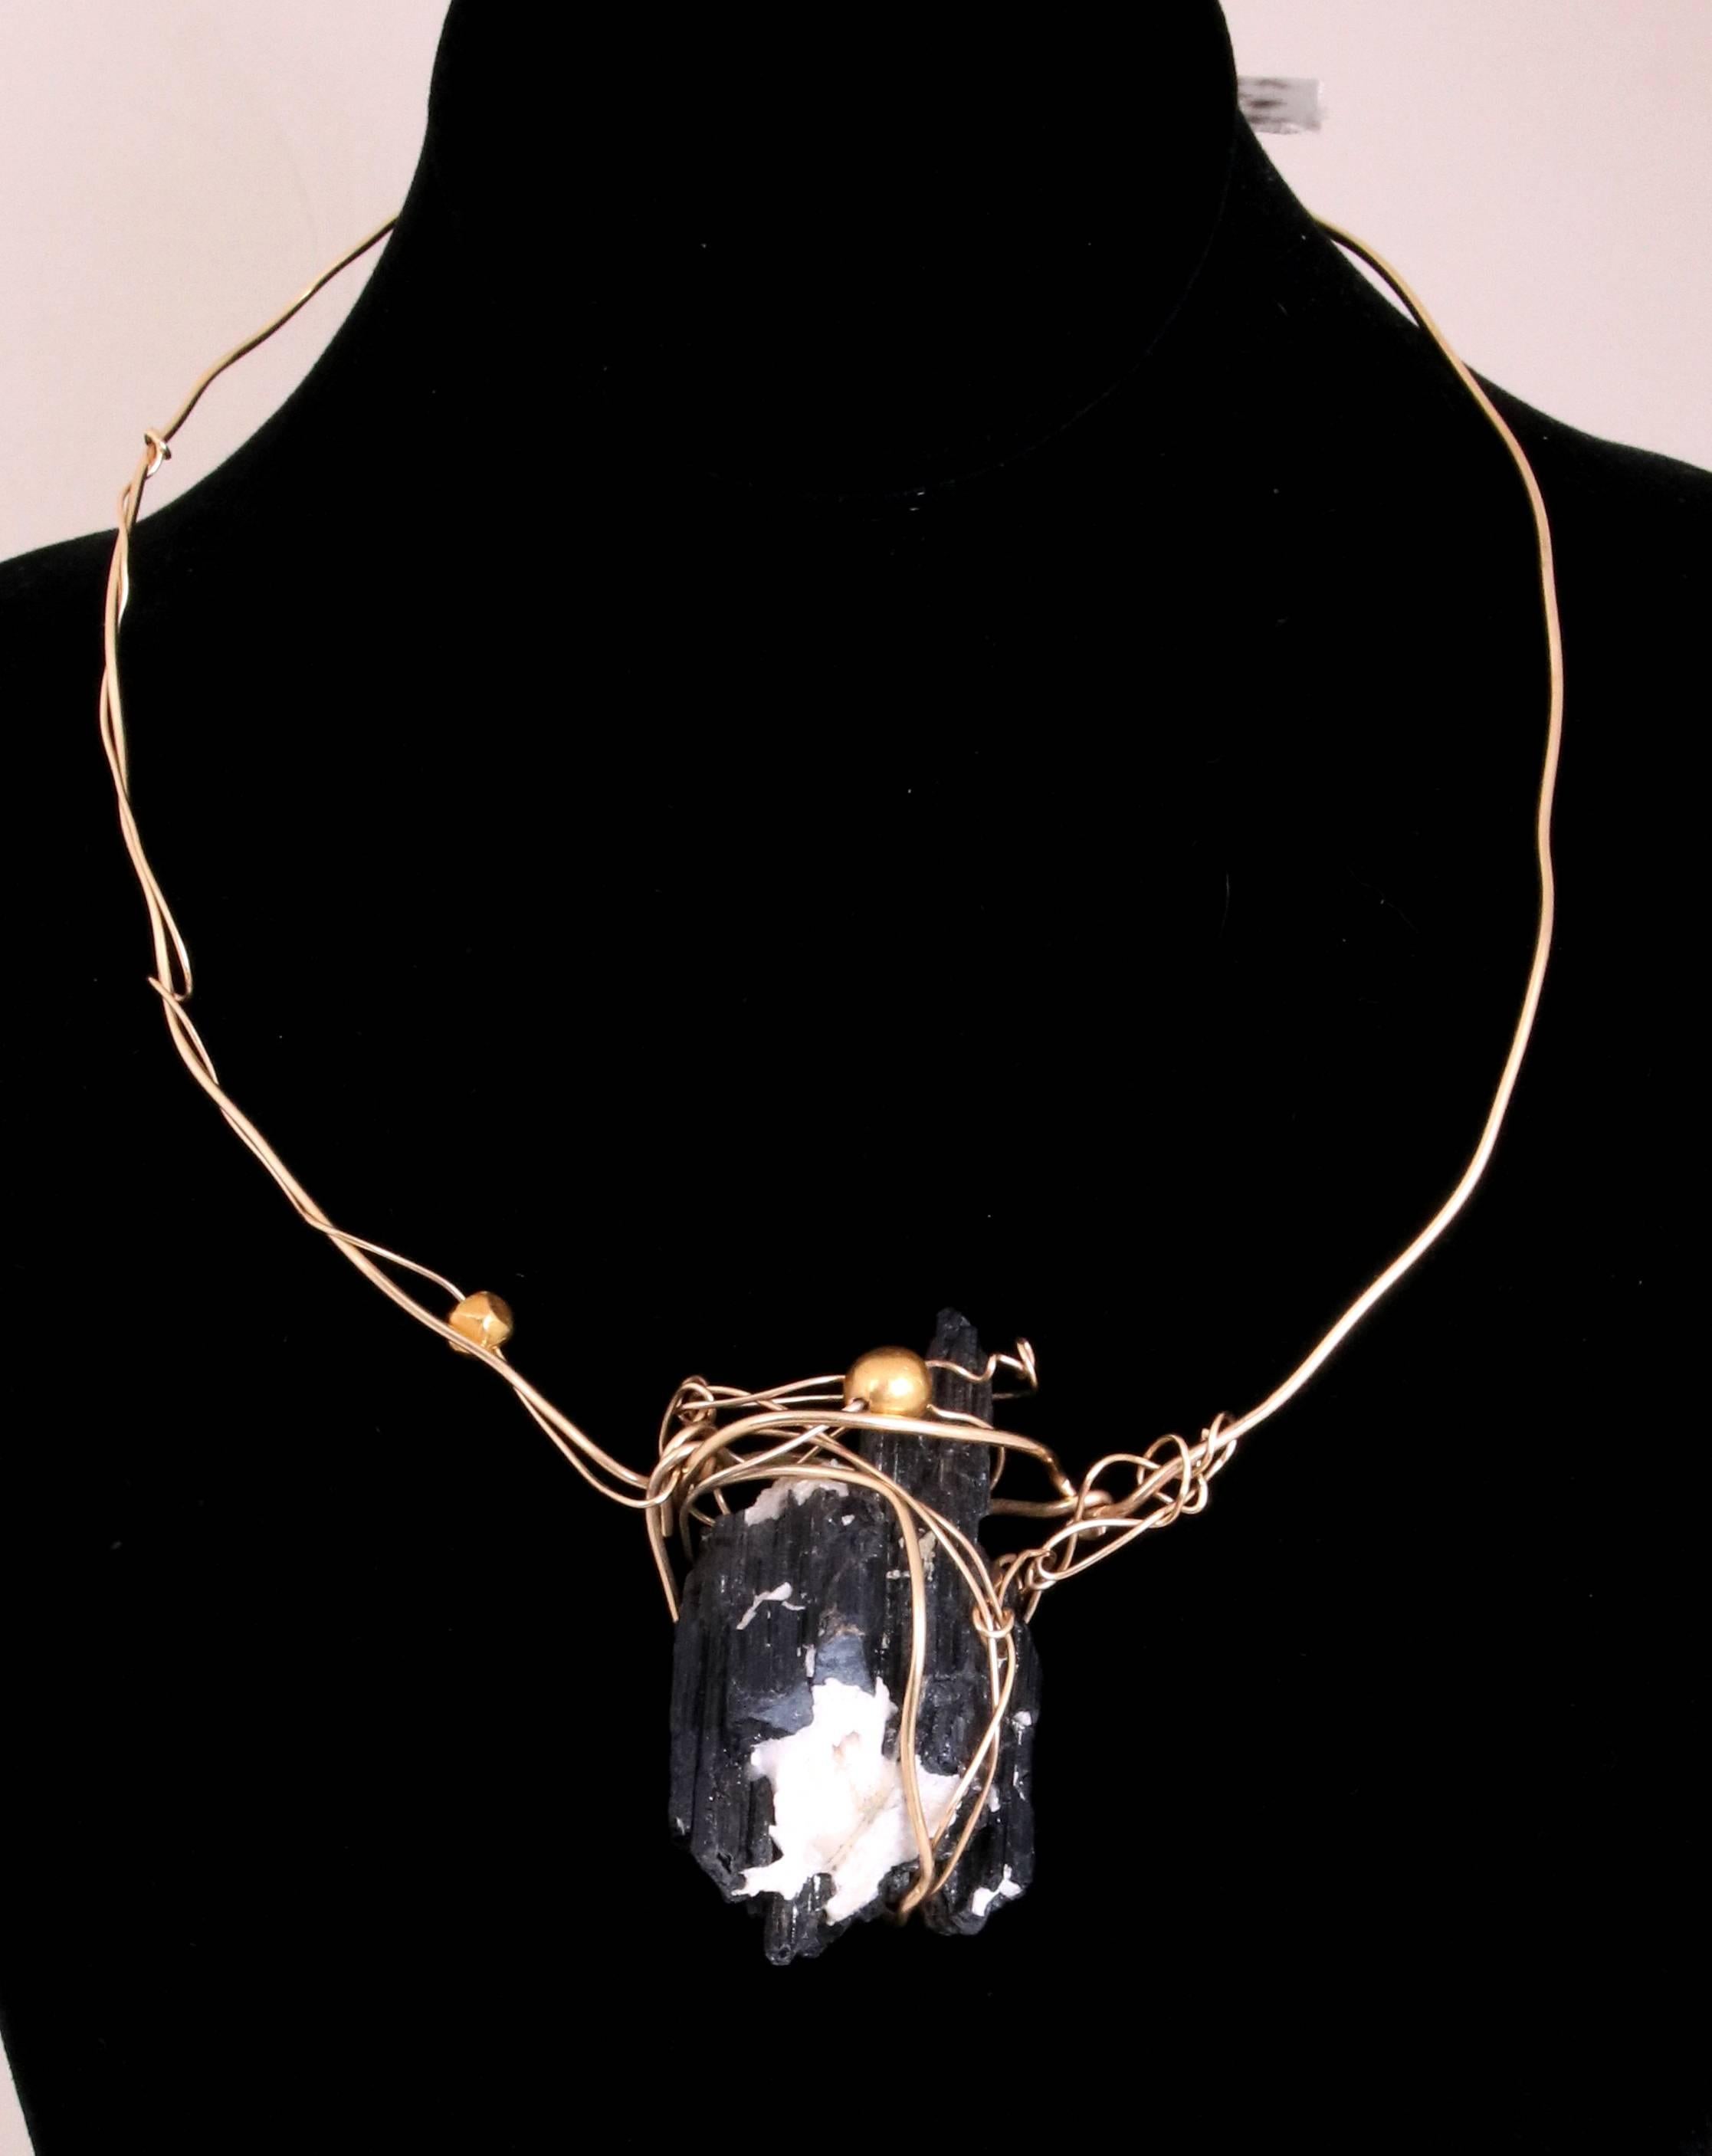 Kazuko 14k gold wire wrapped black tourmaline and quartz crystal necklace with two gold toned beads. Necklace is signed in black marker on white ribbon, 